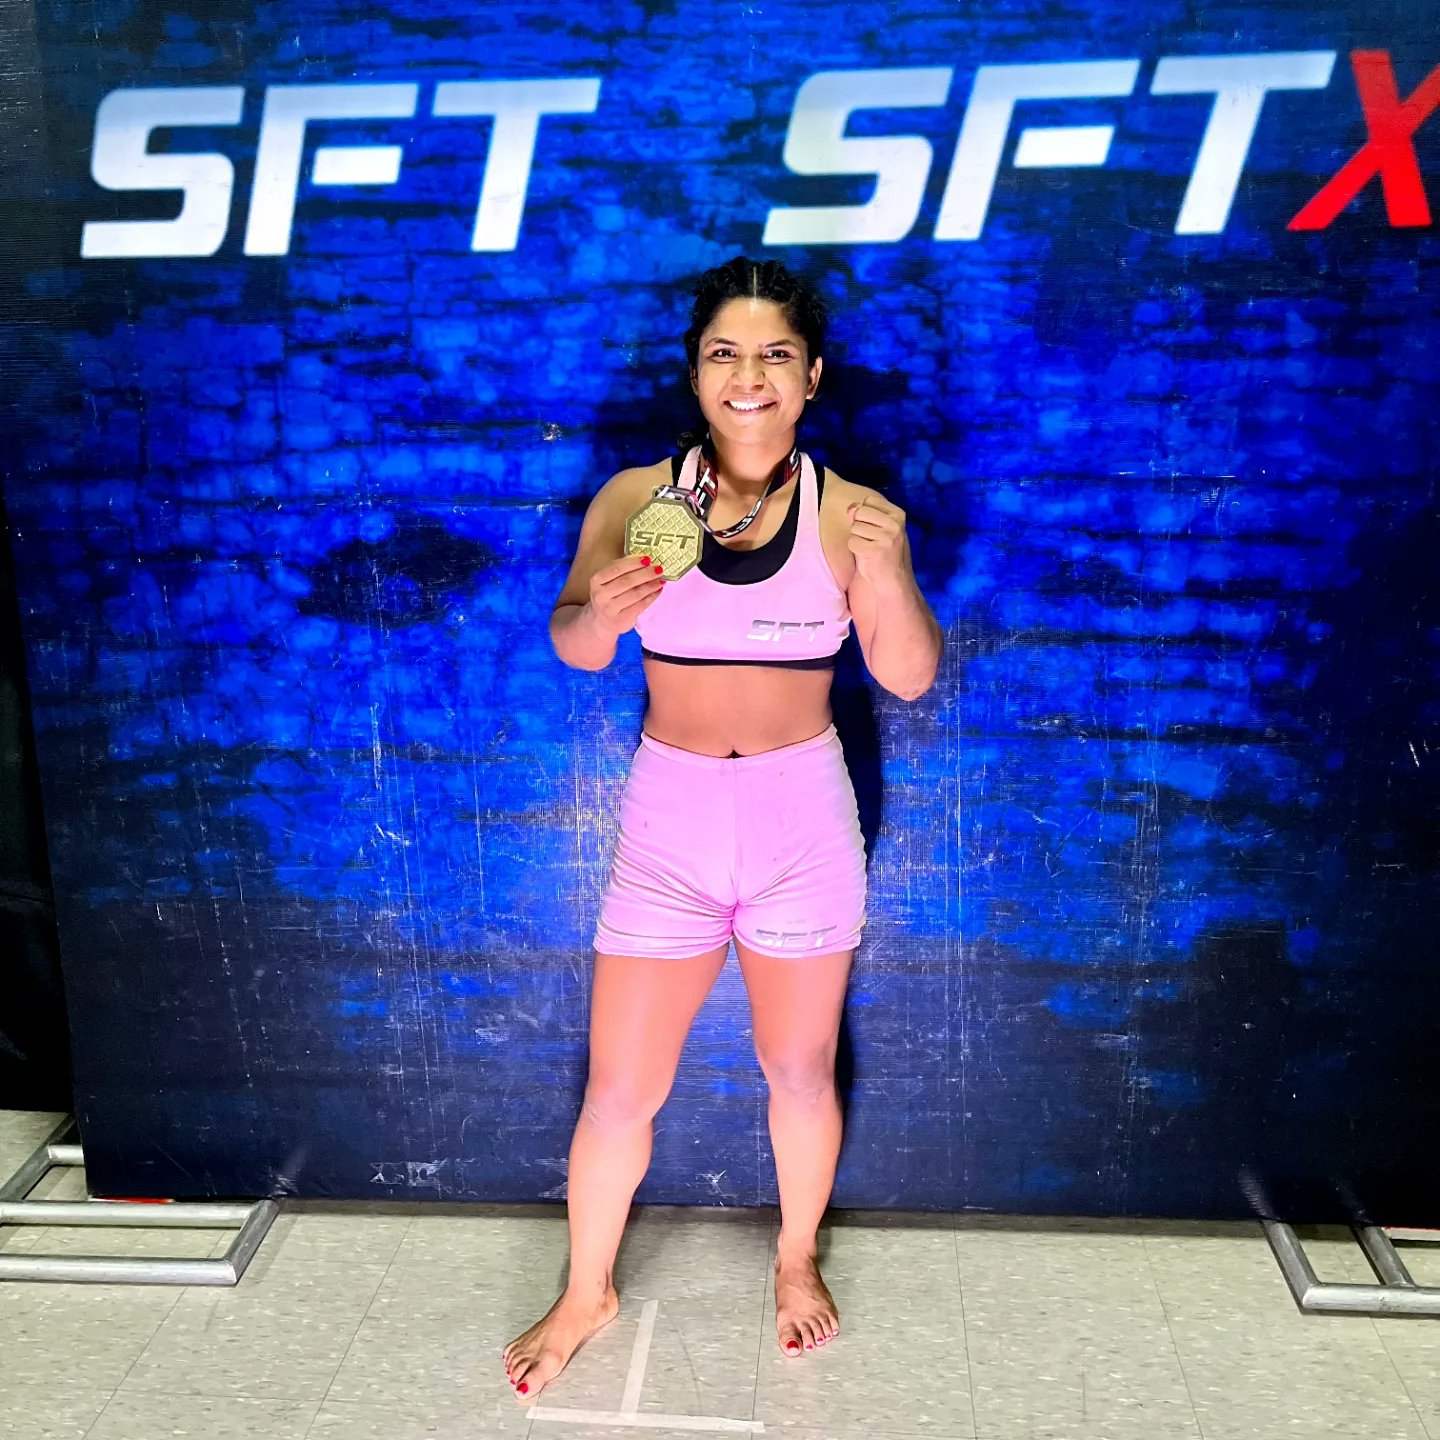 Historic October for Indian MMA. Priya Sharma fights at SFT Brazil